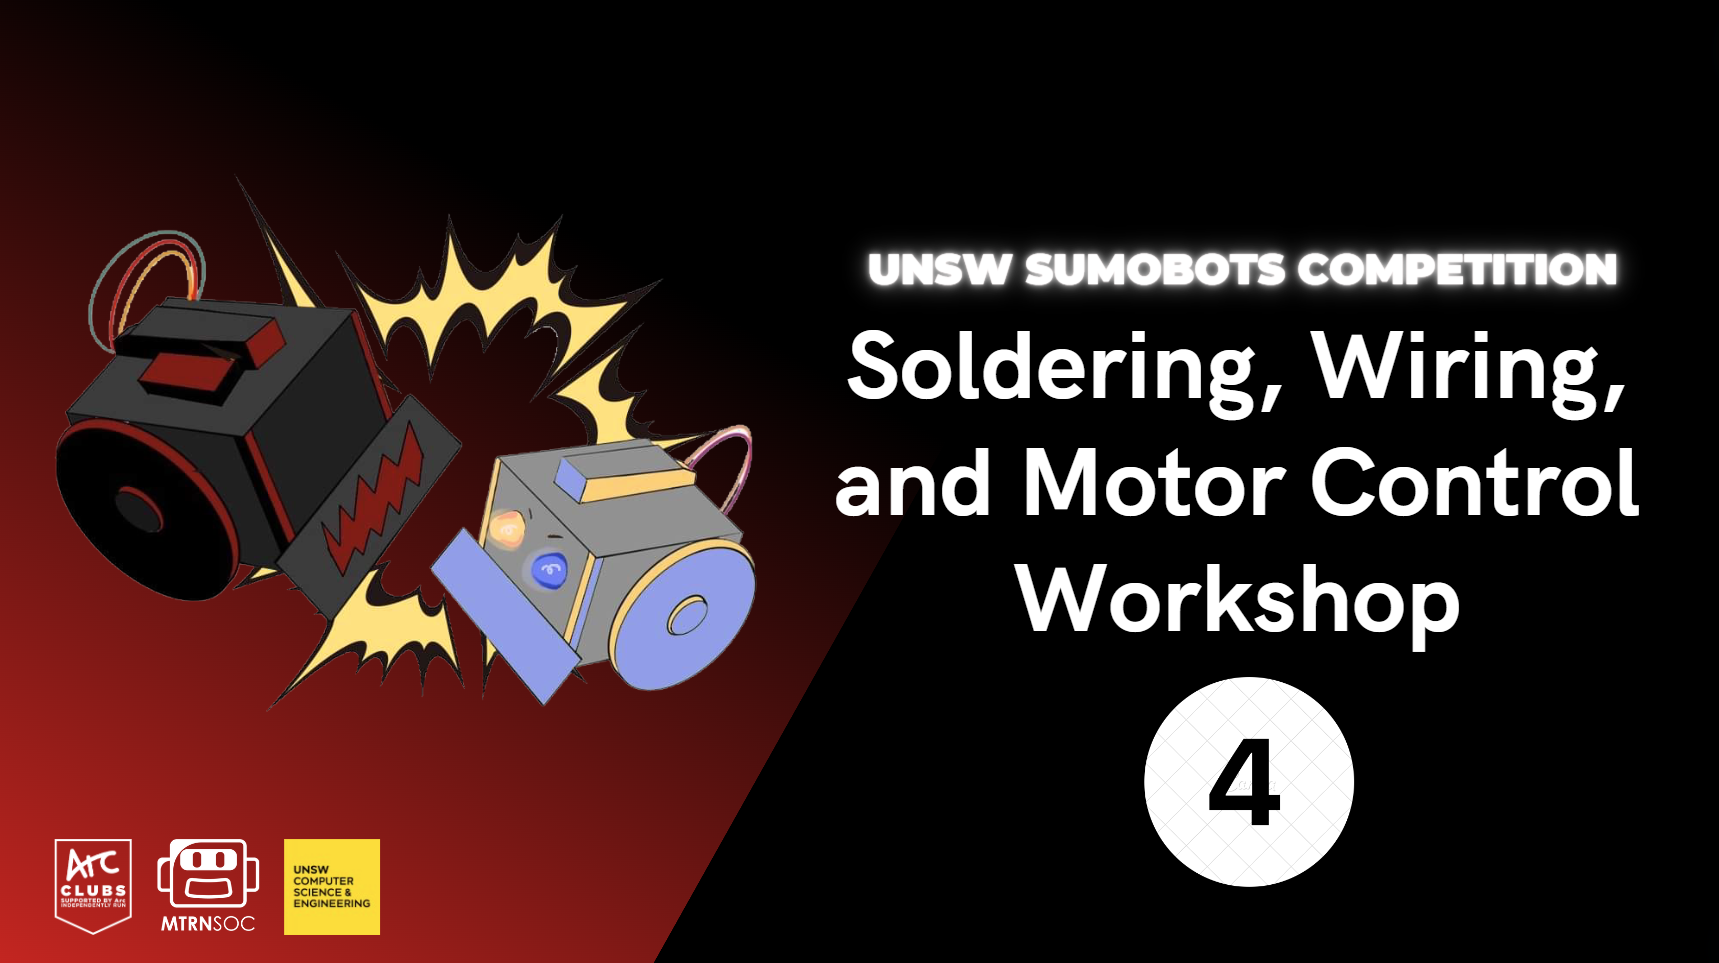 Soldering, Wiring, and Motor Control Workshop